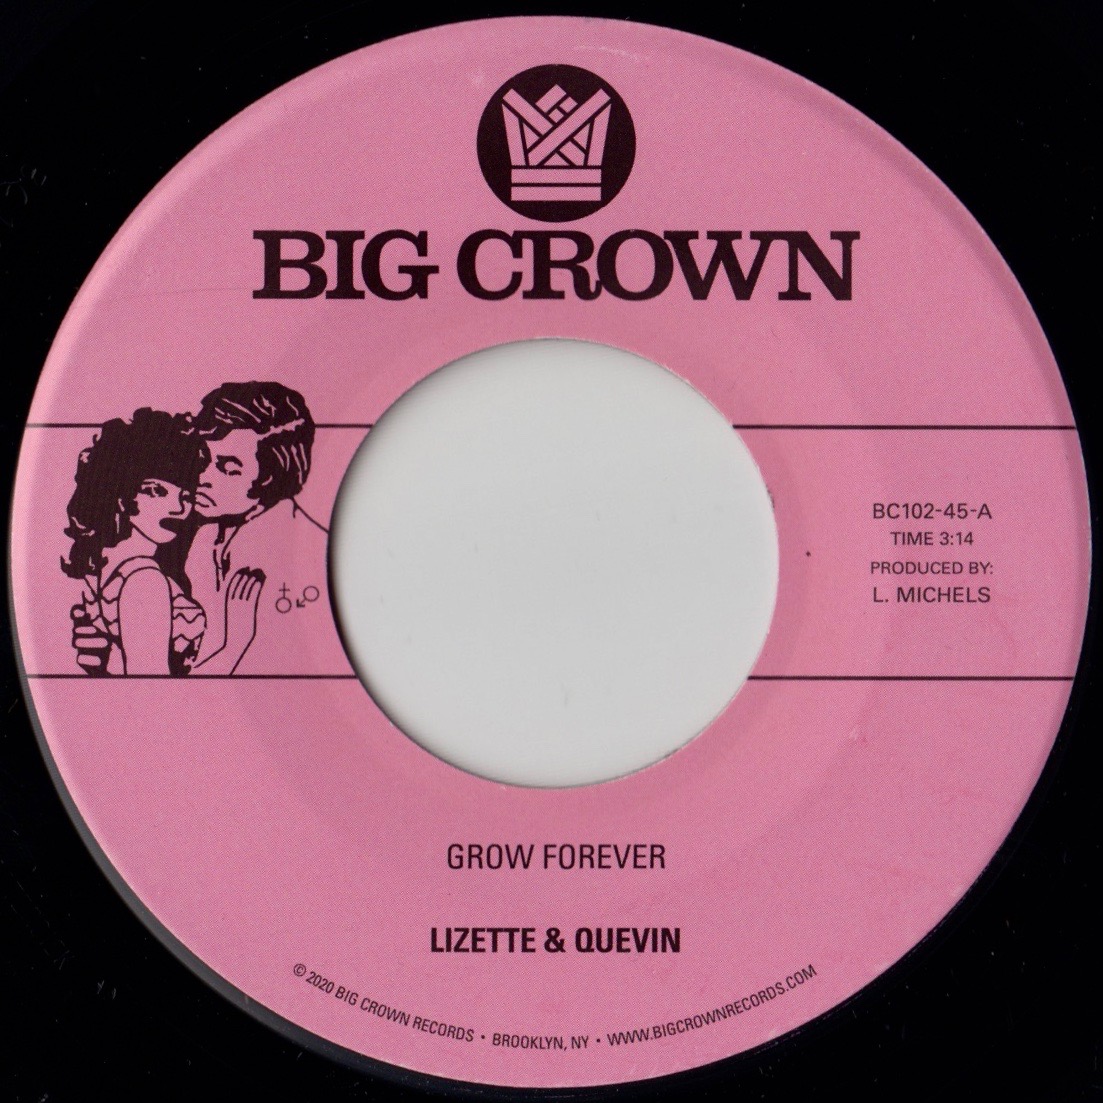 Lizette & Quevin “Grow Forever” b/w “Now It’s Your Turn To Sing”